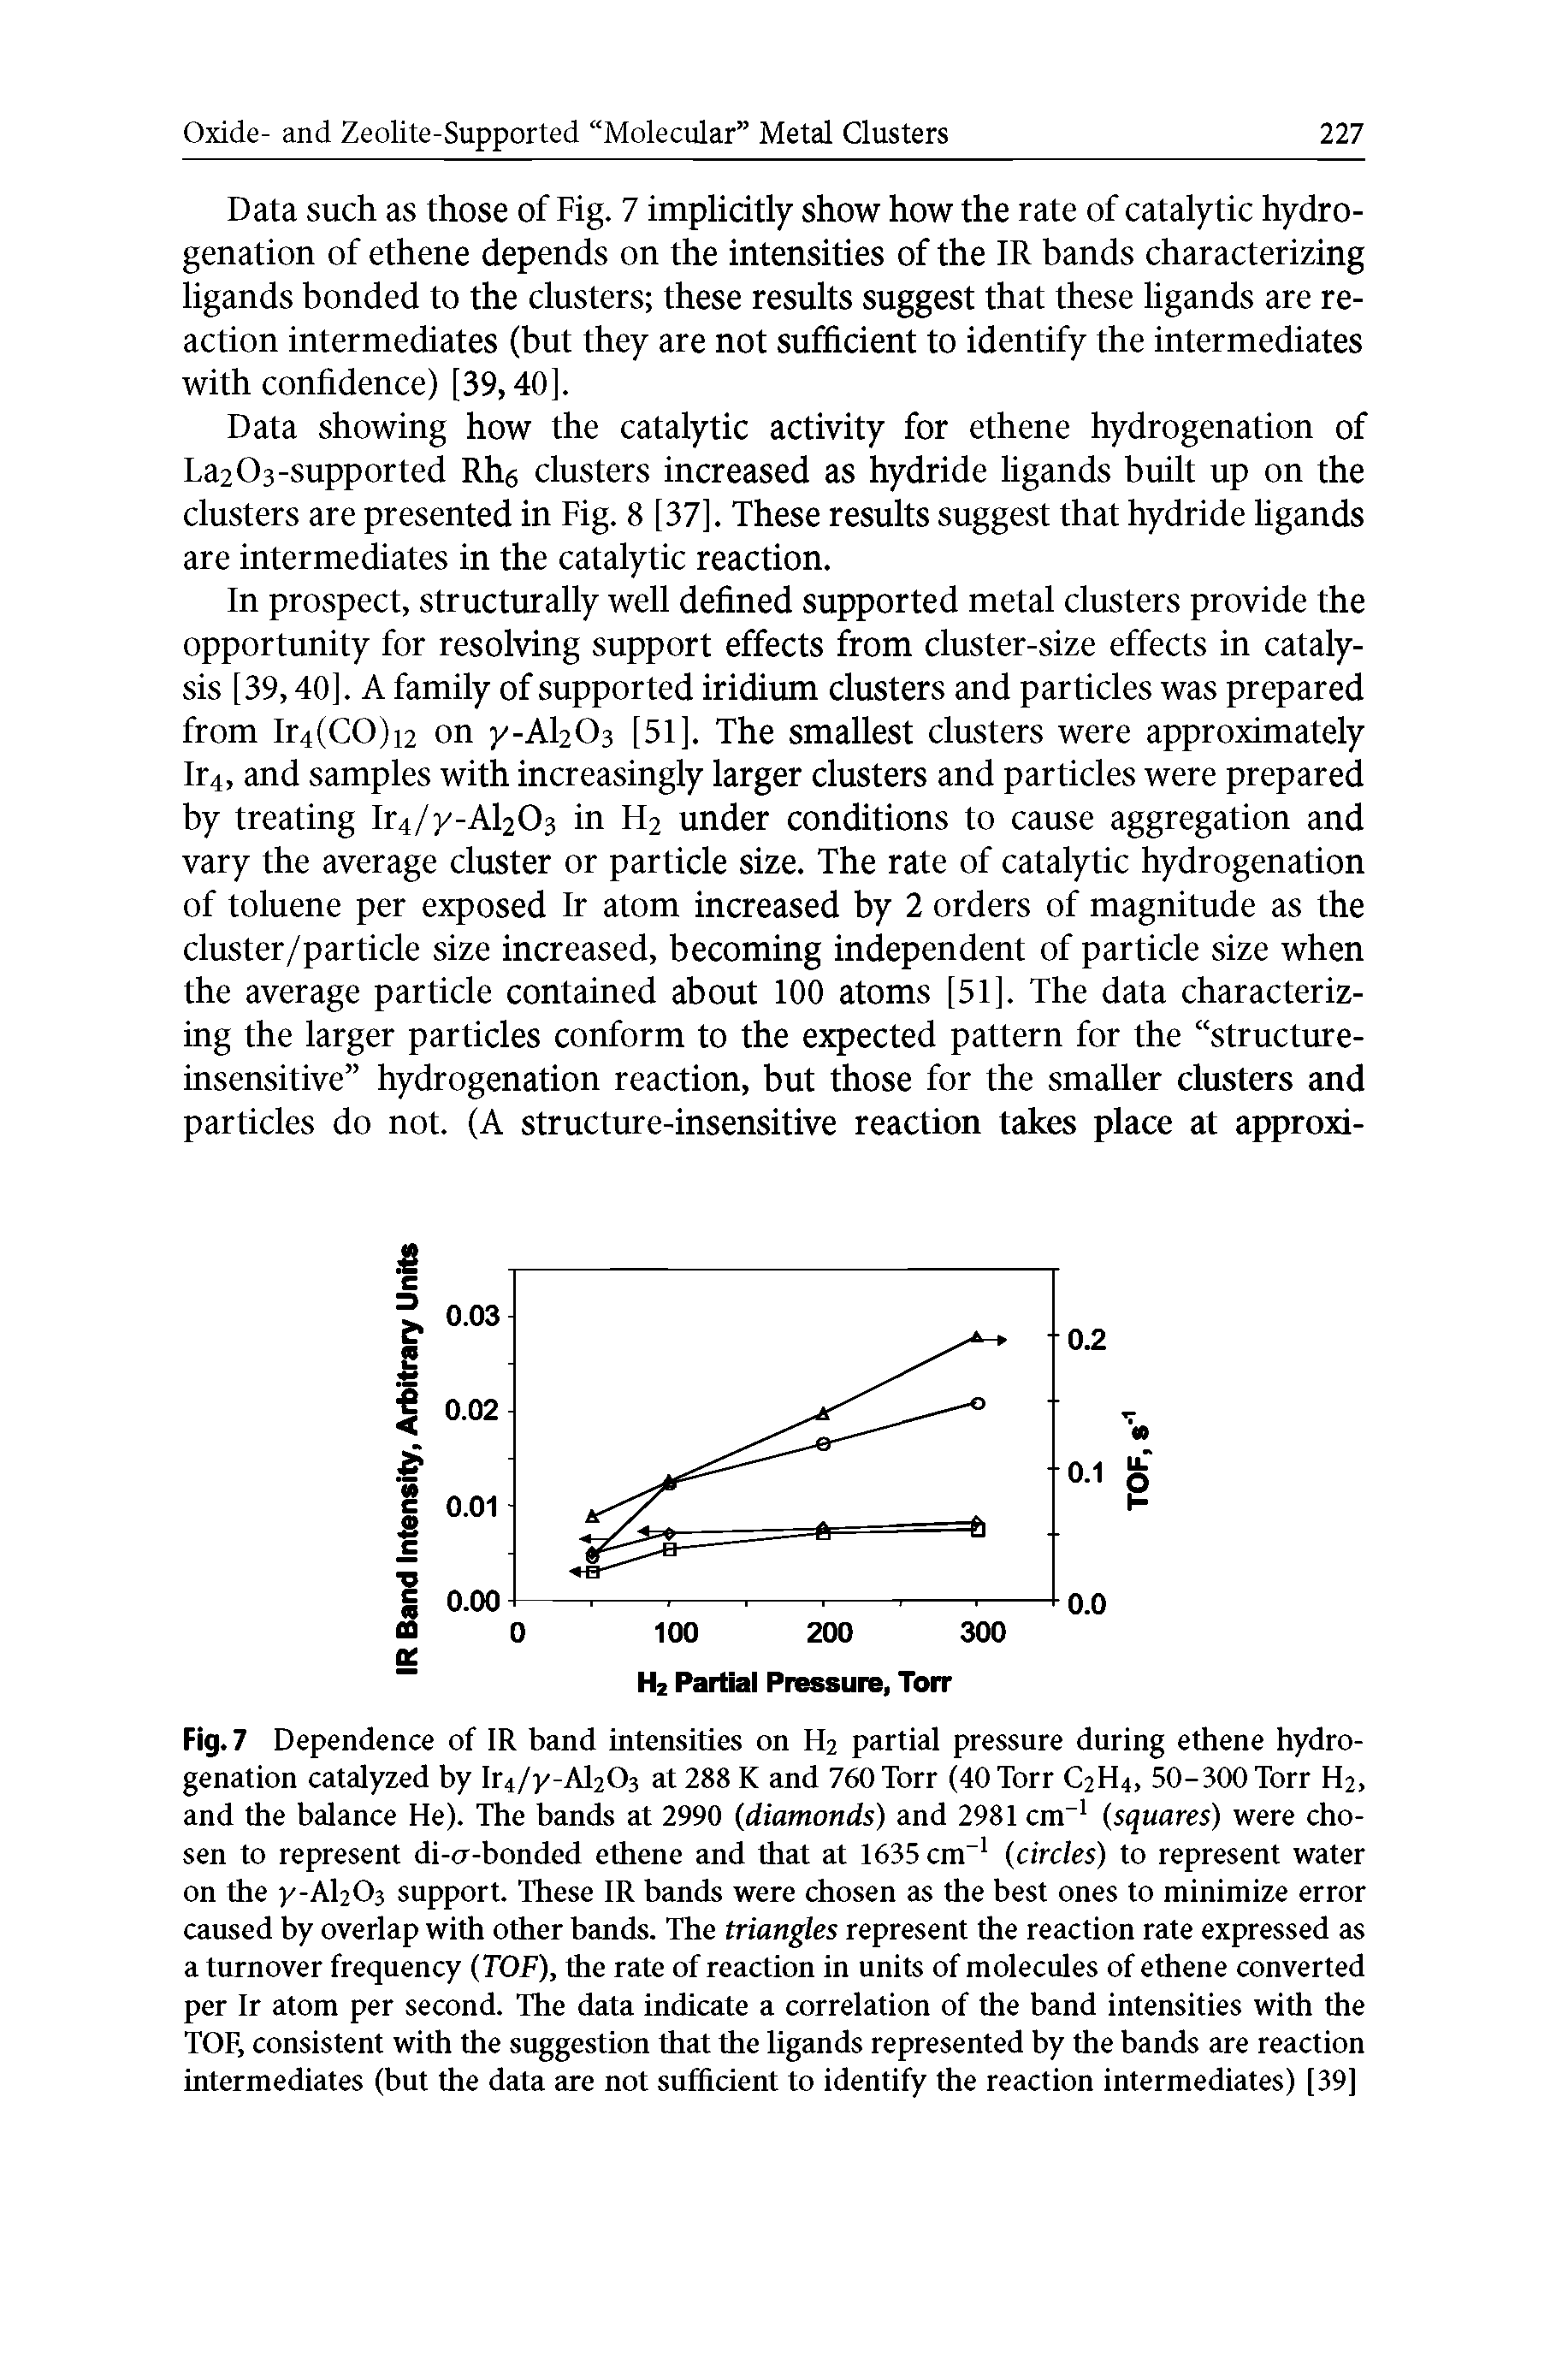 Fig. 7 Dependence of IR band intensities on H2 partial pressure during ethene hydrogenation catalyzed by Ir4/y-Al203 at 288 K and 760 Torr (40 Torr C2H4, 50-300 Torr H2, and the balance He). The bands at 2990 (diamonds) and 2981 cnr (squares) were chosen to represent di-cr-bonded ethene and that at 1635 cnr (circles) to represent water on the y-AbOs support. These IR bands were chosen as the best ones to minimize error caused by overlap with other bands. The triangles represent the reaction rate expressed as a turnover frequency (TOF), the rate of reaction in units of molecules of ethene converted per Ir atom per second. The data indicate a correlation of the band intensities with the TOF, consistent with the suggestion that the ligands represented by the bands are reaction intermediates (but the data are not sufficient to identify the reaction intermediates) [39]...